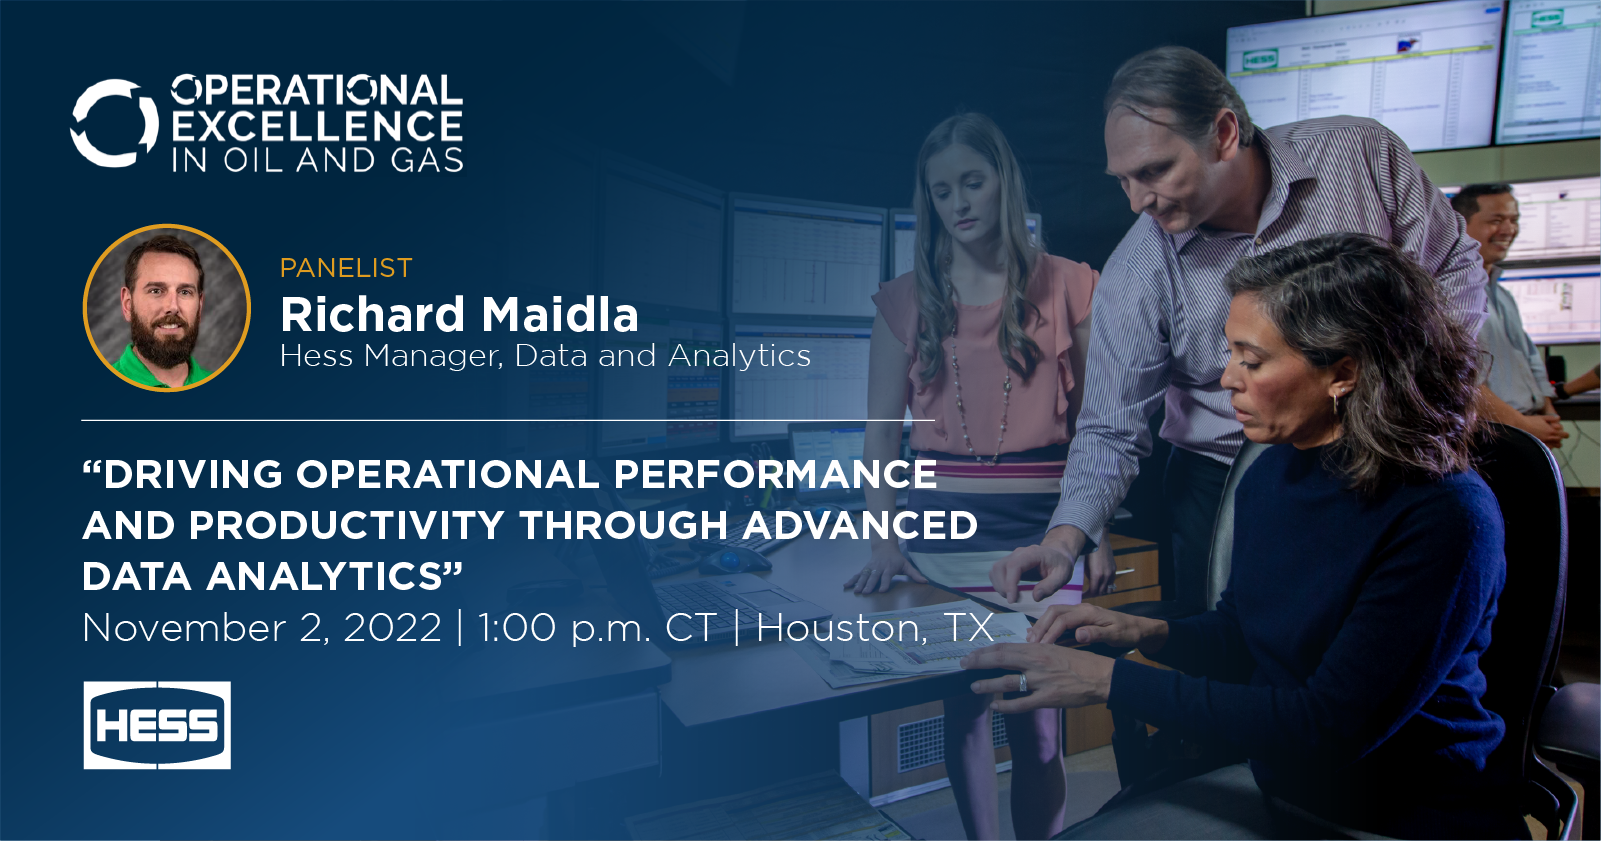 Richard Maidla Panelist at Operational Excellence Conference